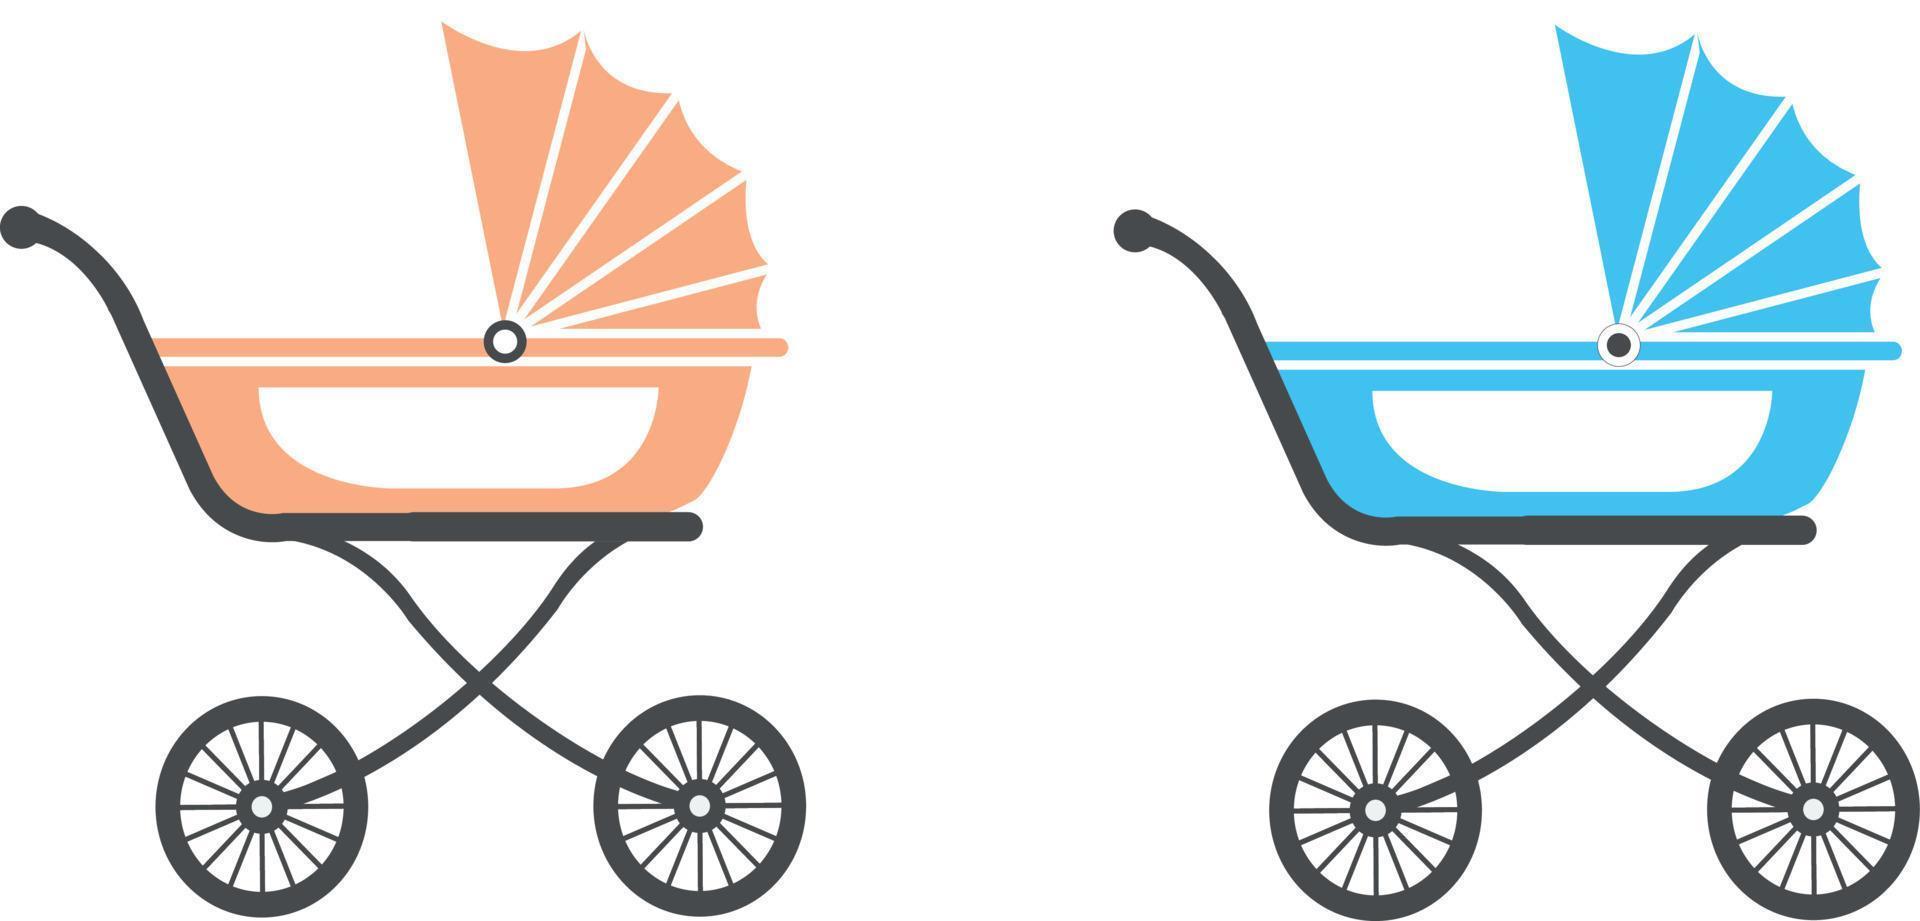 Set of different baby strollers. Modern baby carriages for twins and newborns. Hand drawn vector illustration isolated on colored background, flat